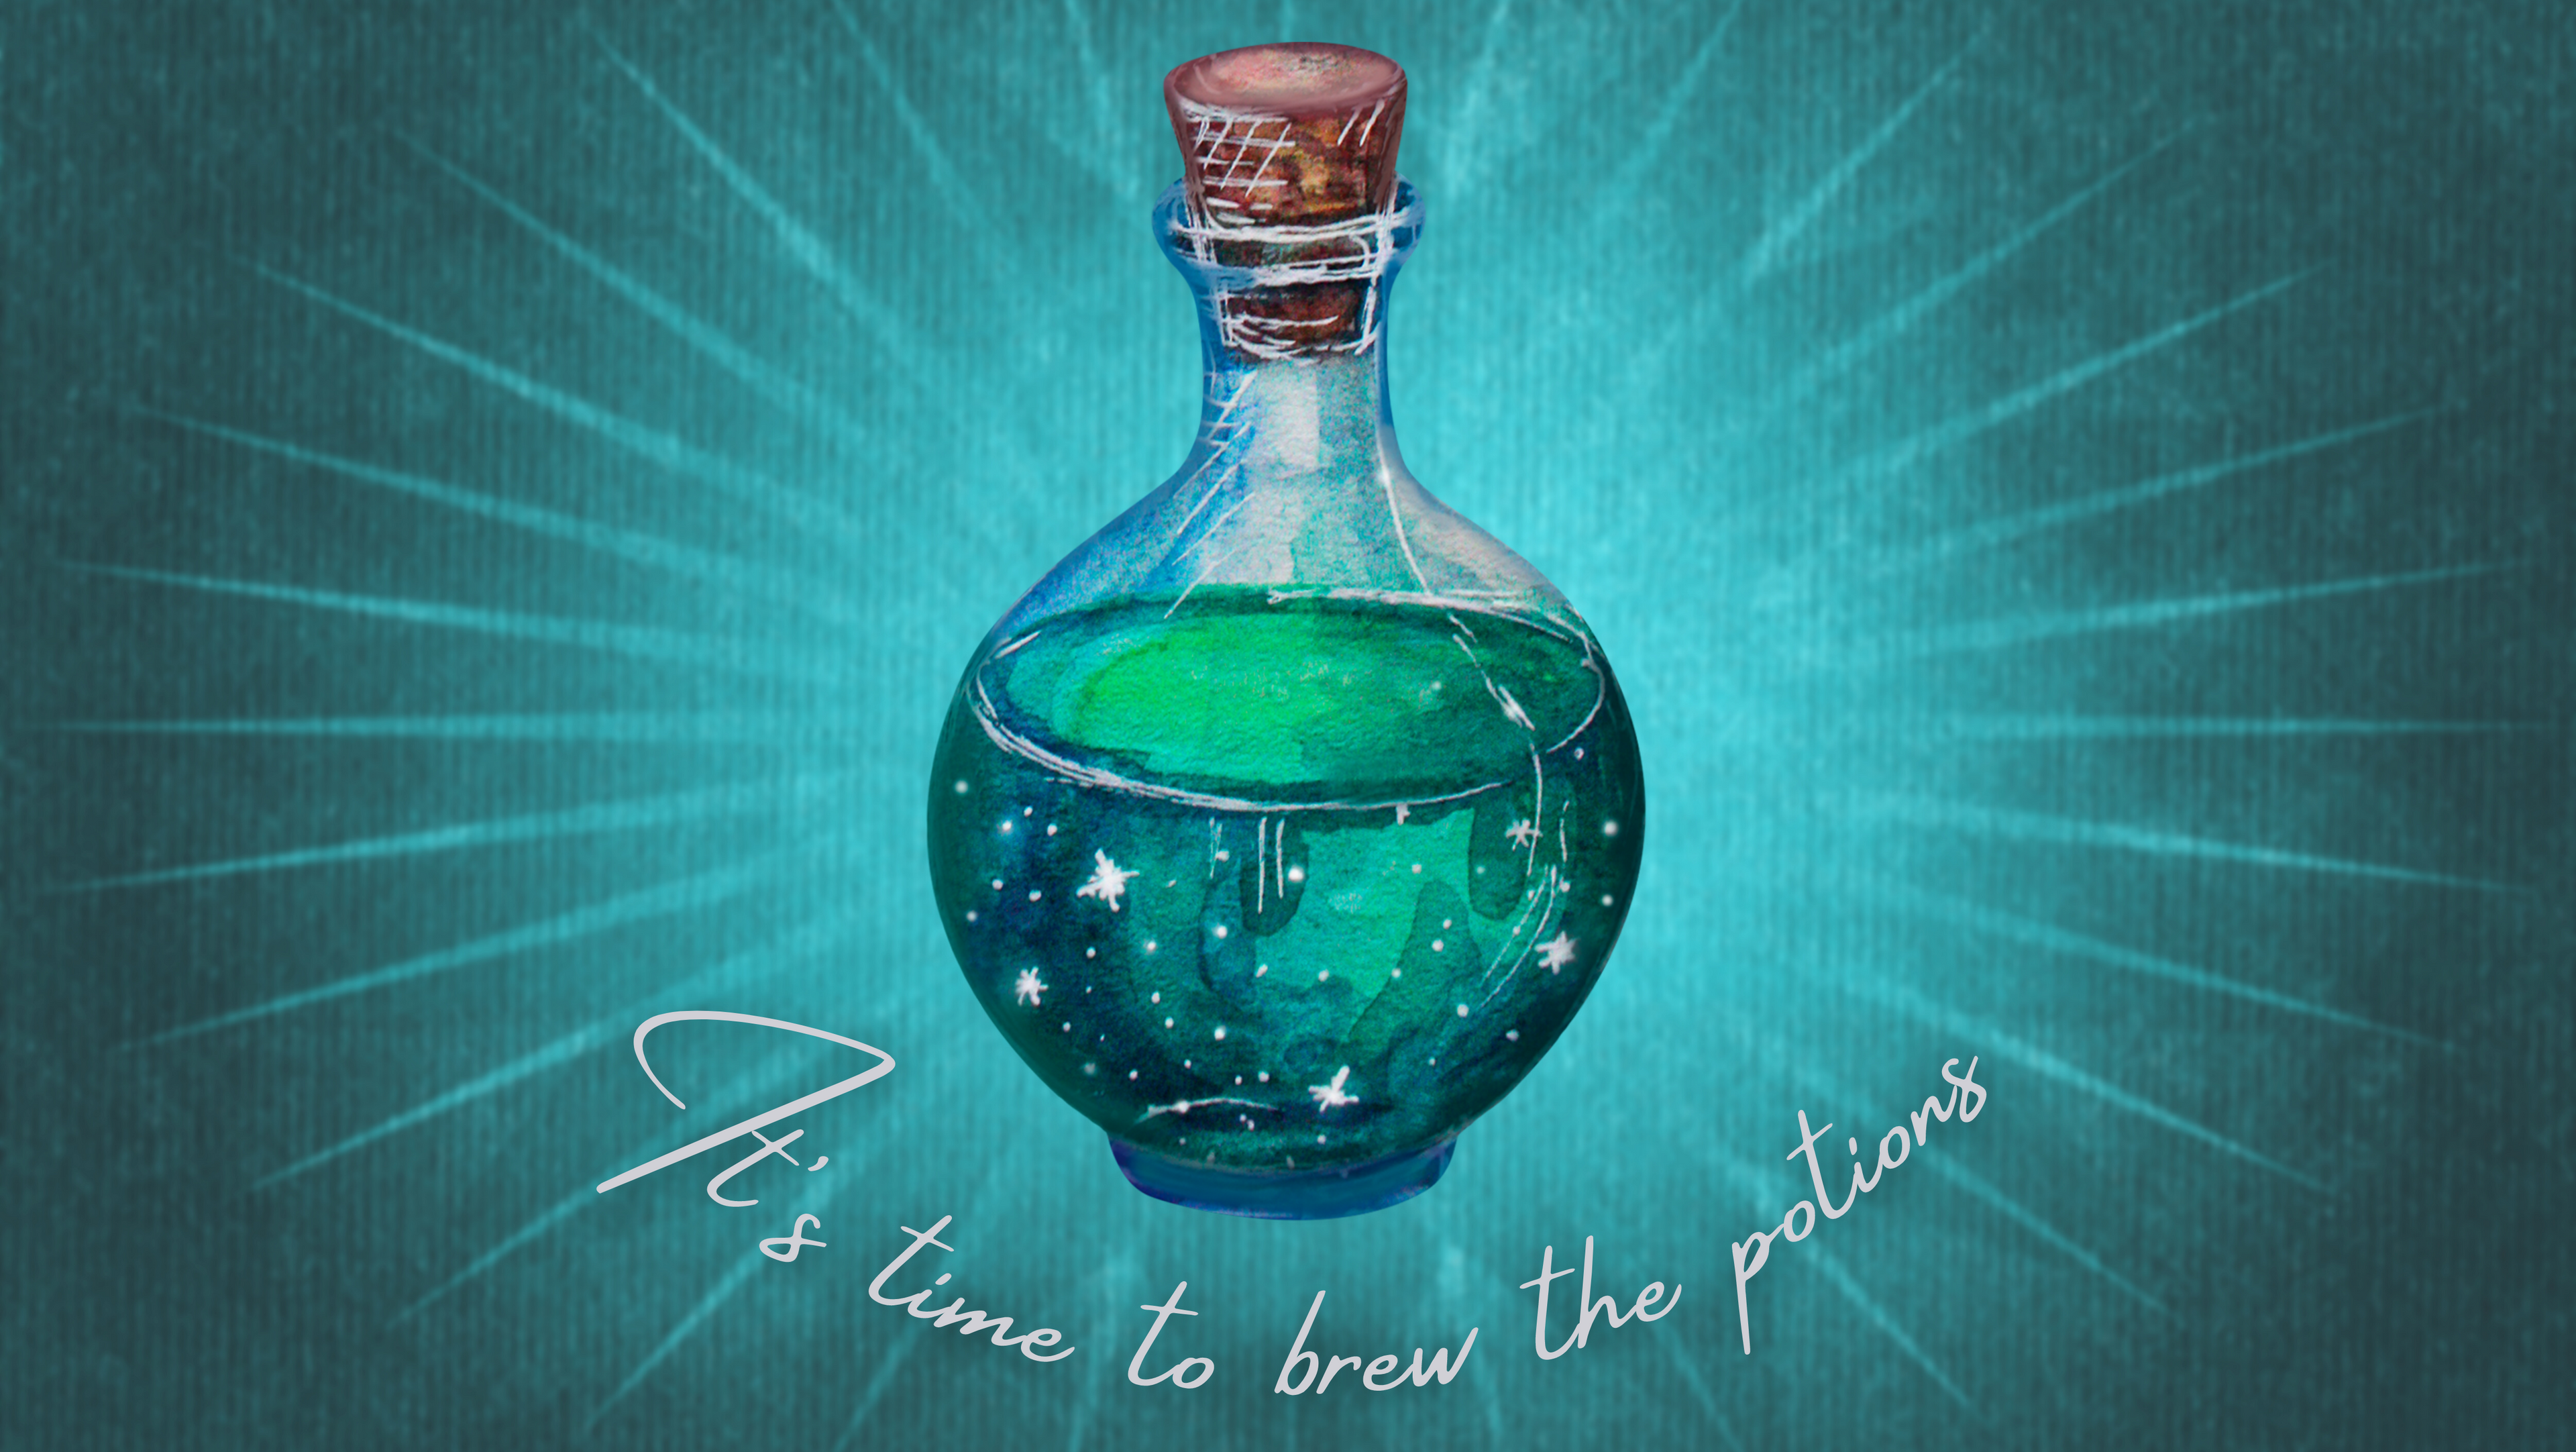 Image with a teal spell jar with text under it saying "It's time to brew the potions". - The Call of the Craft